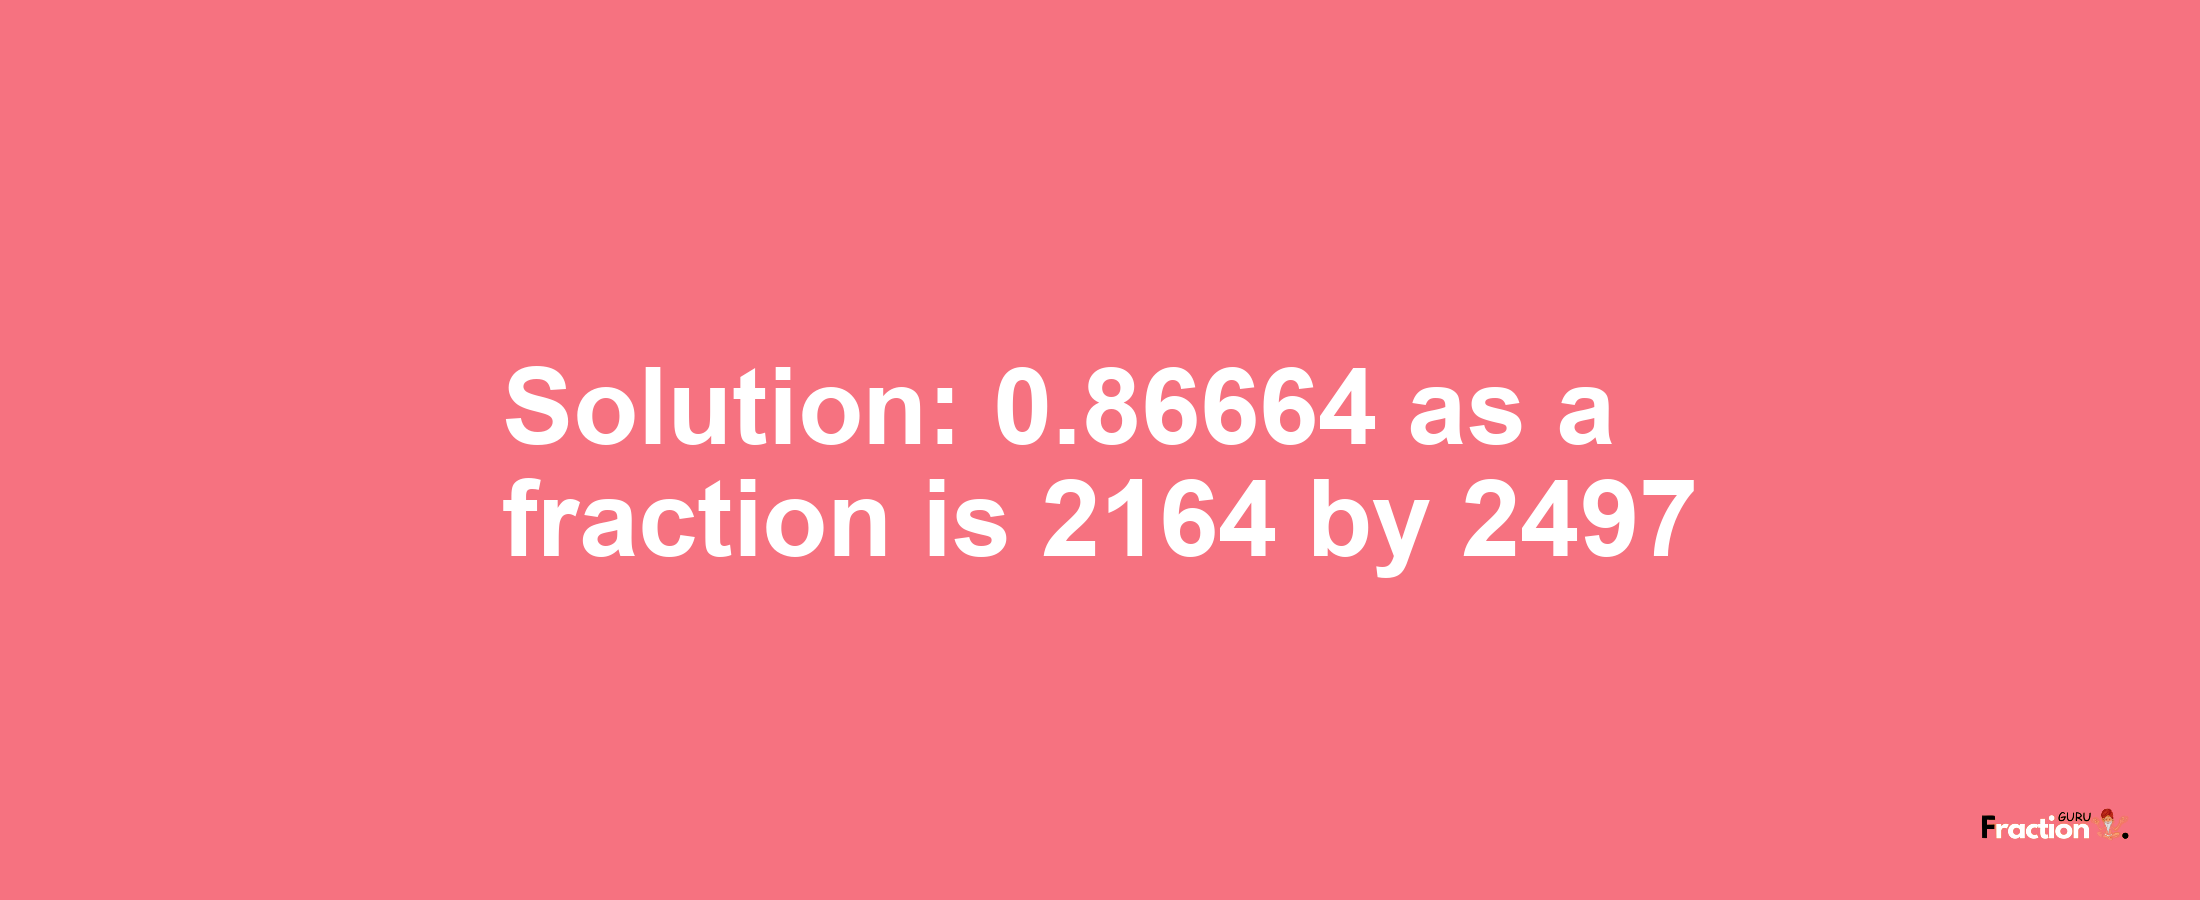 Solution:0.86664 as a fraction is 2164/2497